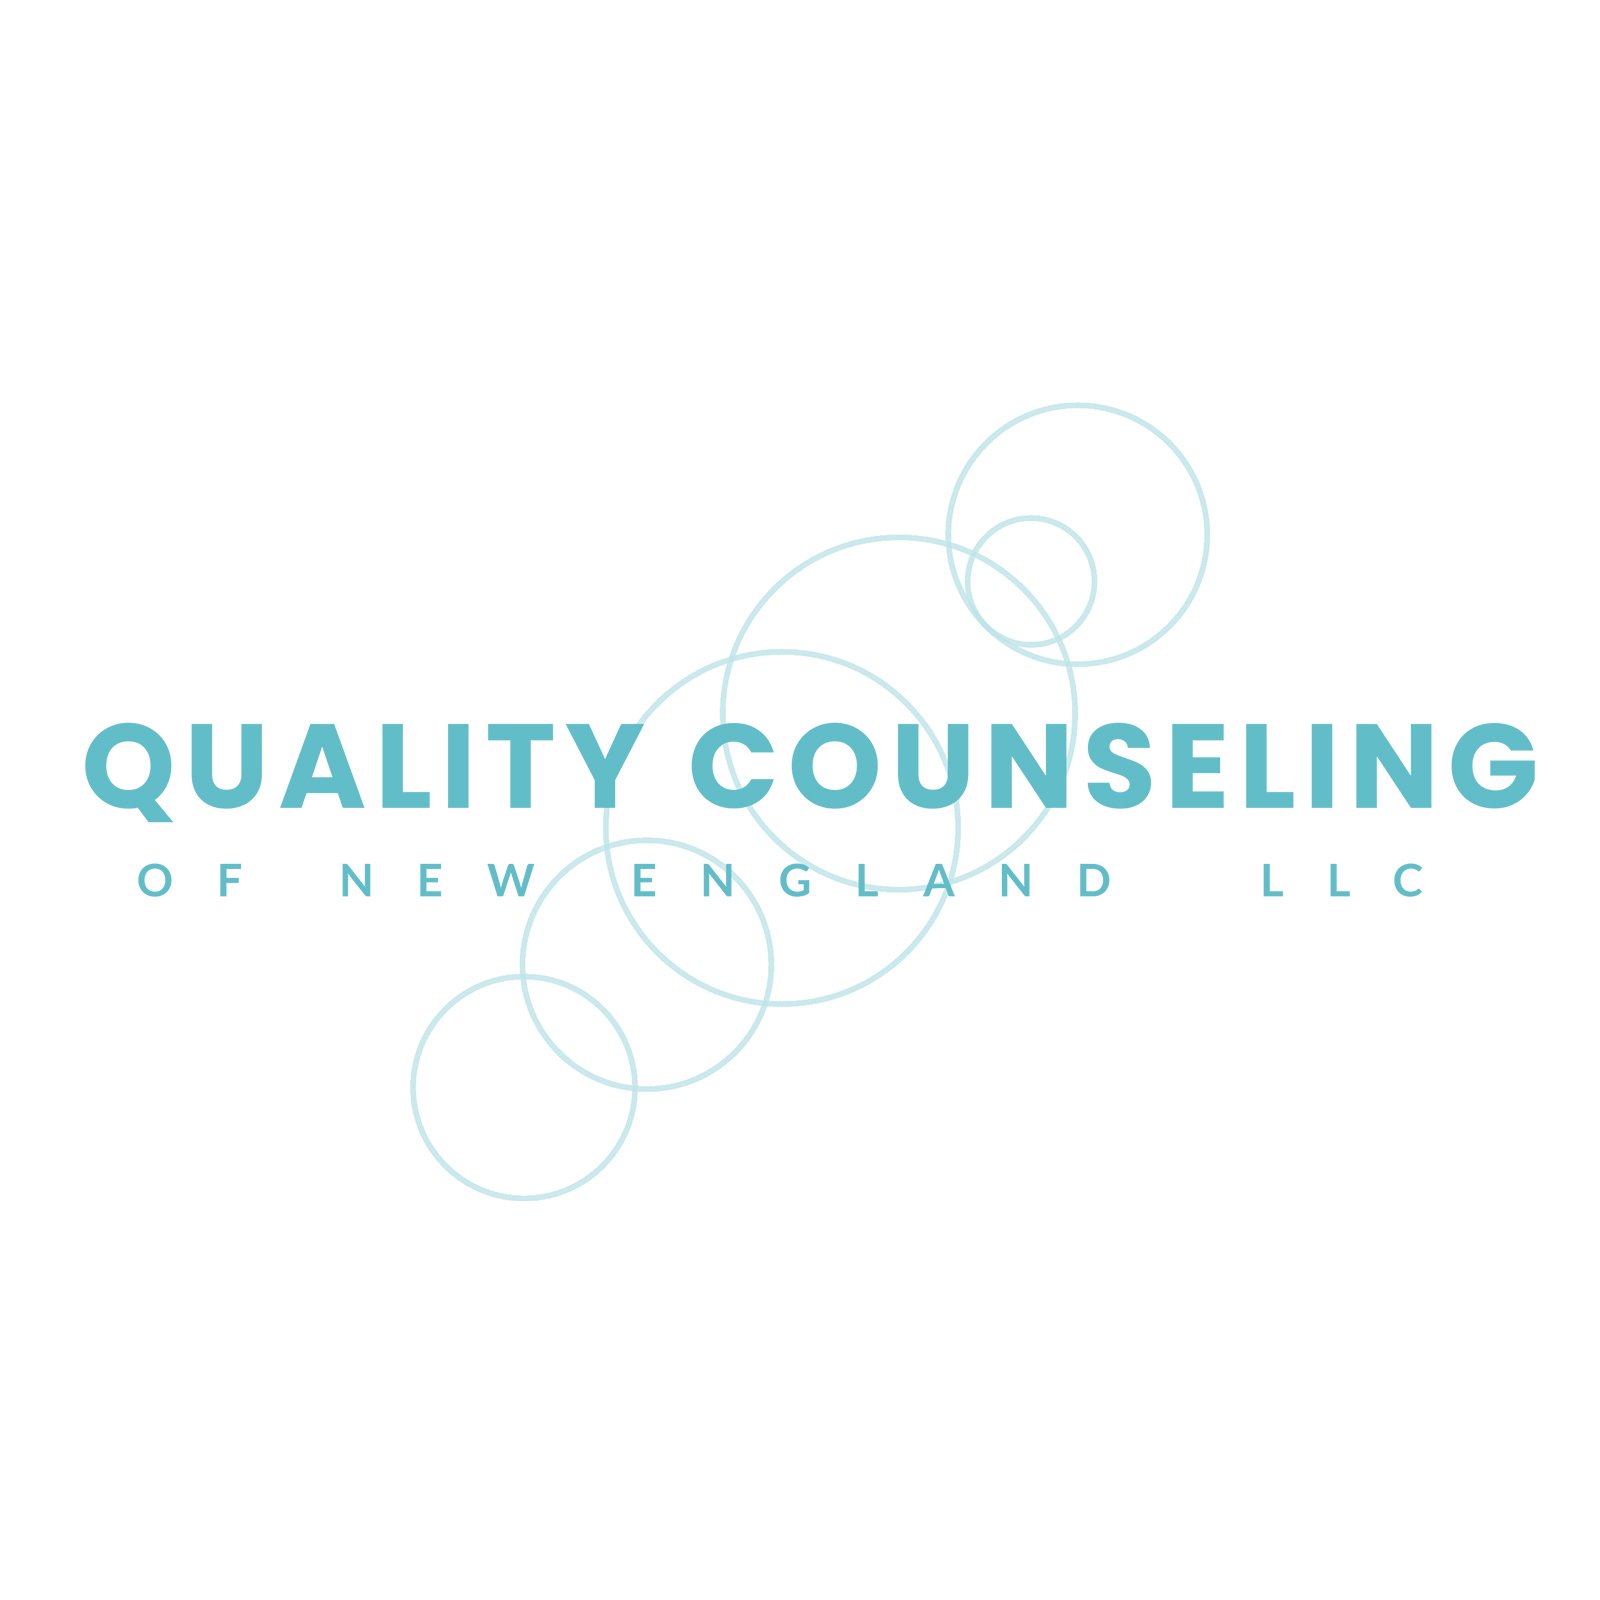 Quality Counseling of New England